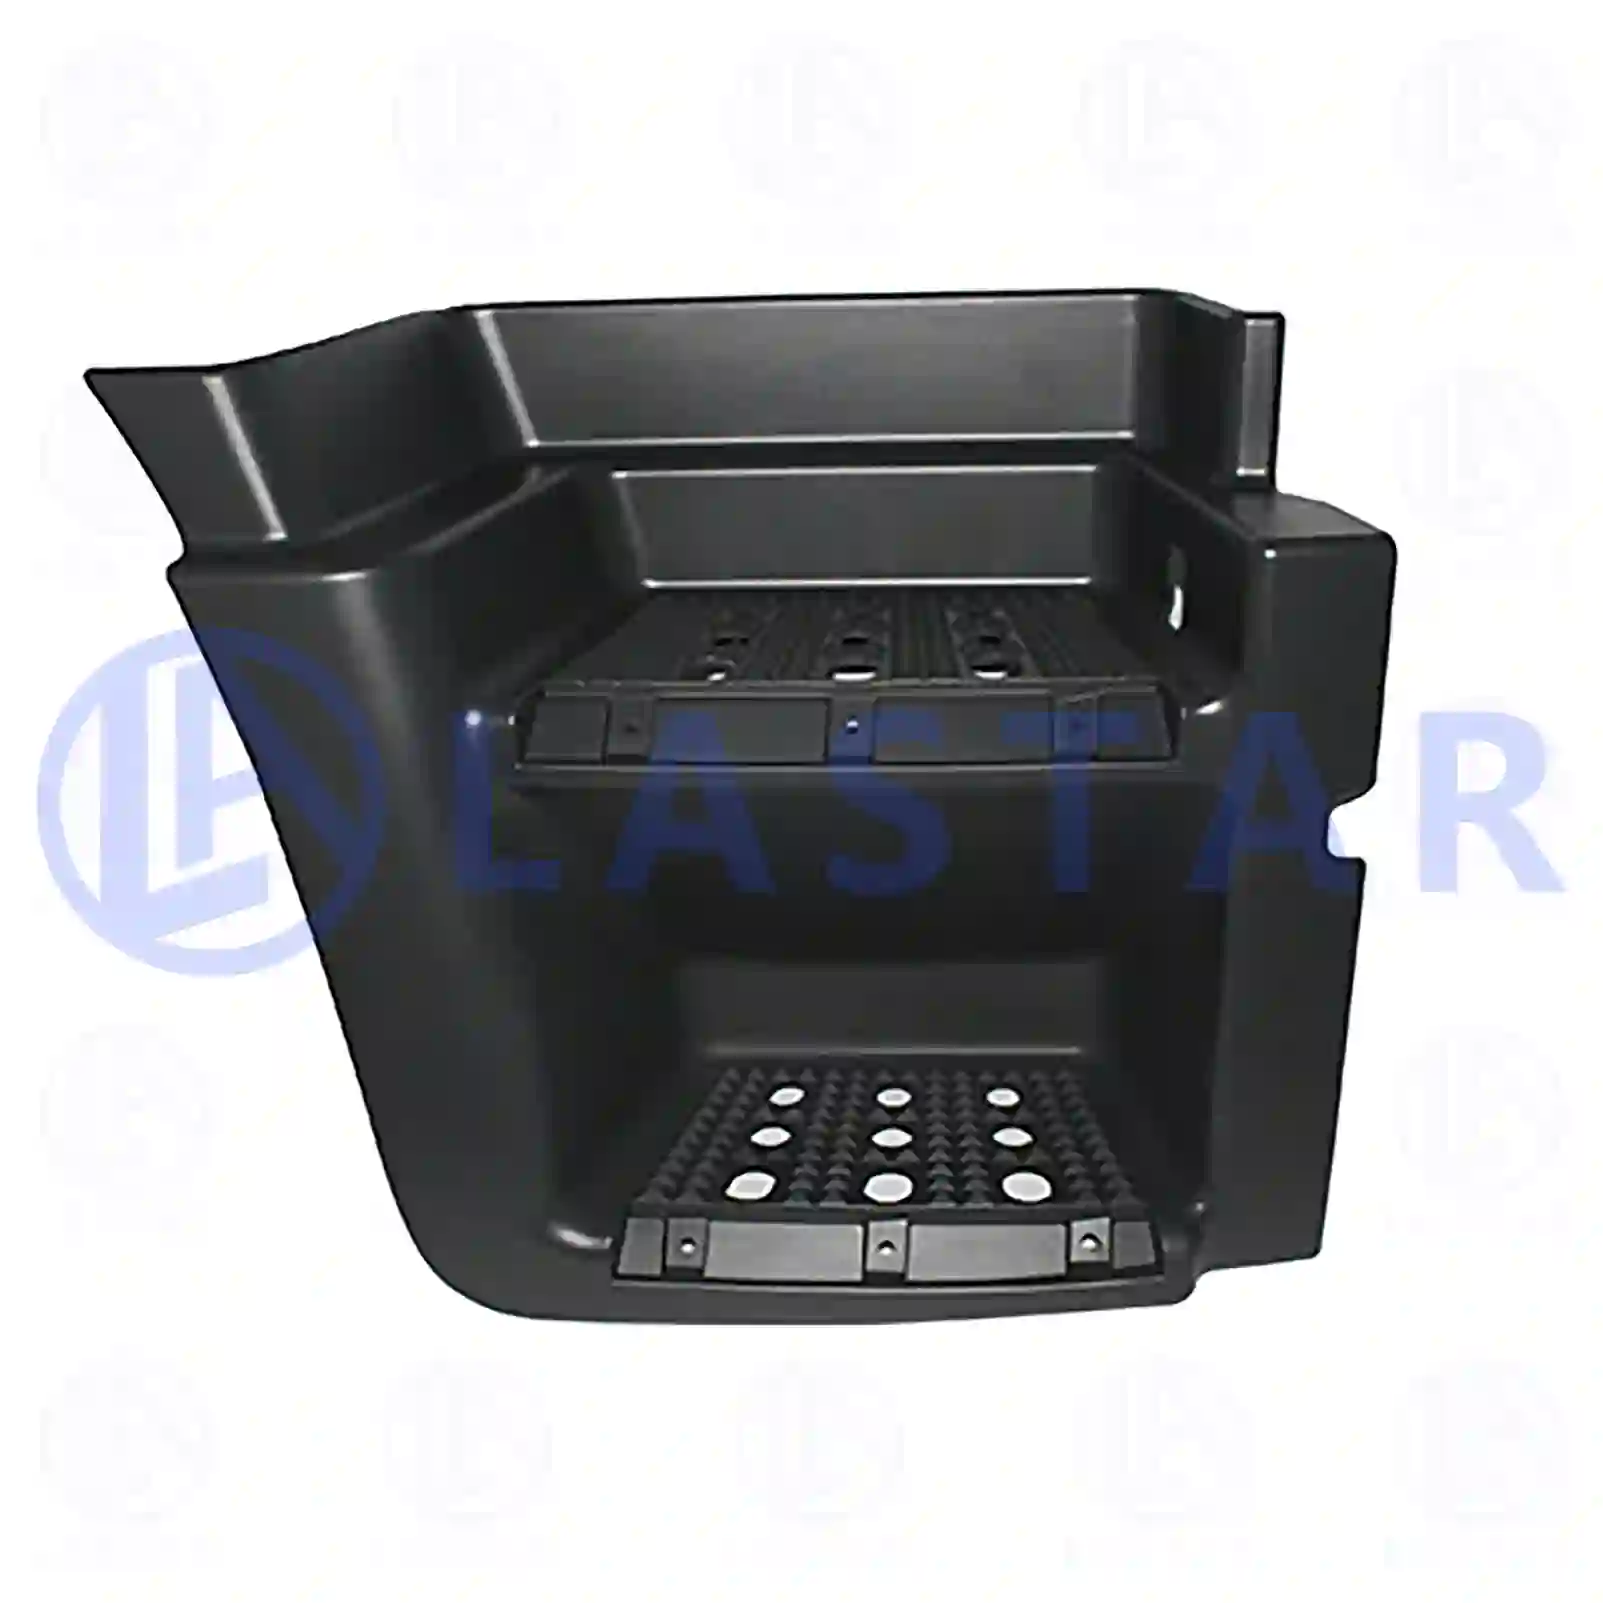 Step well case, right, black, 77719863, 02997119, 2997119, 500375431, 504082857, 504103304, ZG61231-0008 ||  77719863 Lastar Spare Part | Truck Spare Parts, Auotomotive Spare Parts Step well case, right, black, 77719863, 02997119, 2997119, 500375431, 504082857, 504103304, ZG61231-0008 ||  77719863 Lastar Spare Part | Truck Spare Parts, Auotomotive Spare Parts